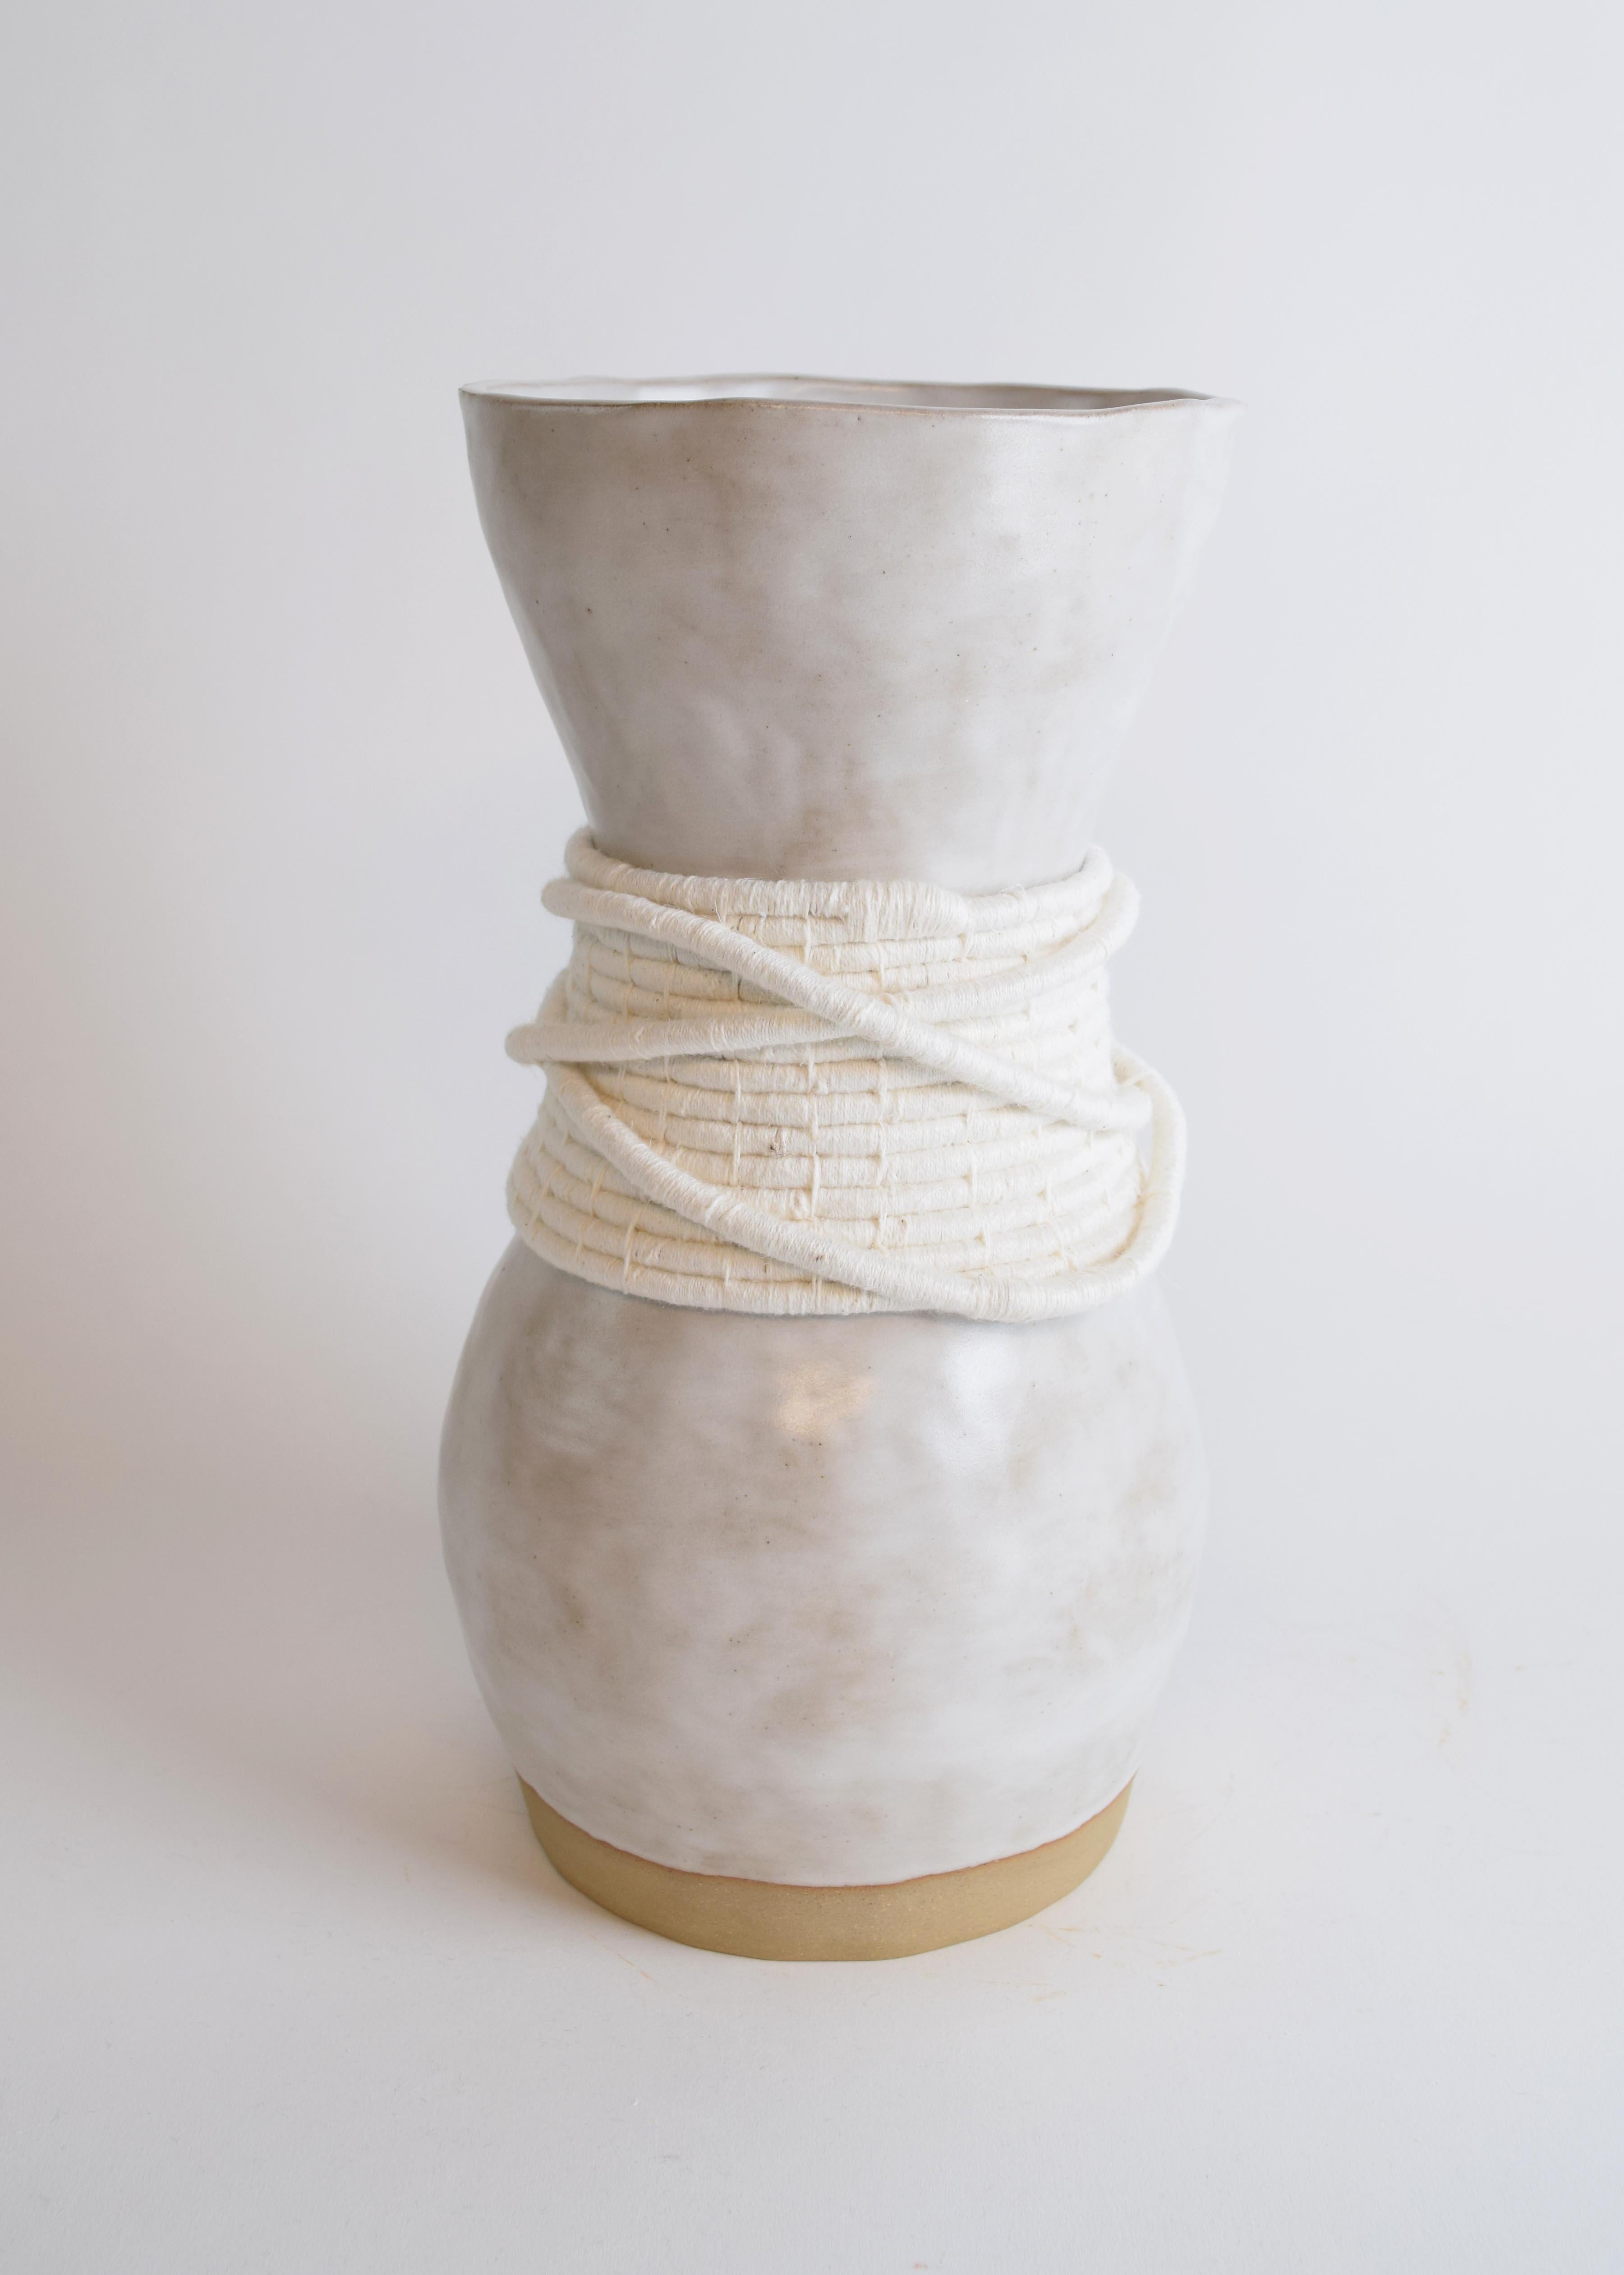 Hand-Woven One of a Kind Ceramic & Fiber Vase #809  - White Glaze with Woven White Cotton For Sale